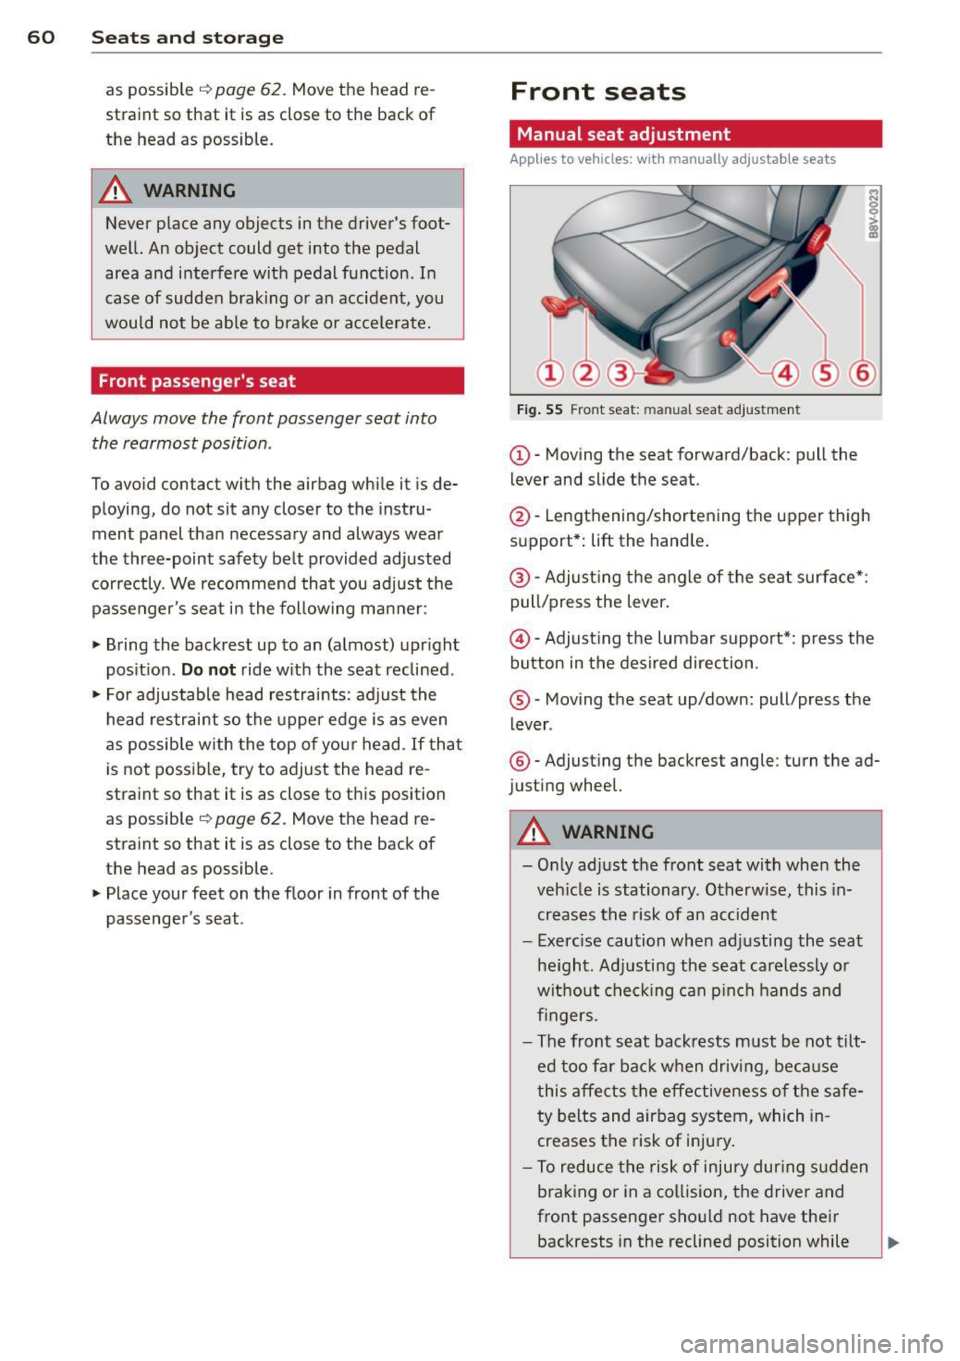 AUDI A3 CABRIOLET 2015  Owners Manual 60  Seats and  st o rage 
as  possible <:!> page  62. Move the  head  re ­
straint  so  that  it  is as  close  to  the  back  of 
the  head  as  possible. 
A WARNING 
Never place  any  objects  in t